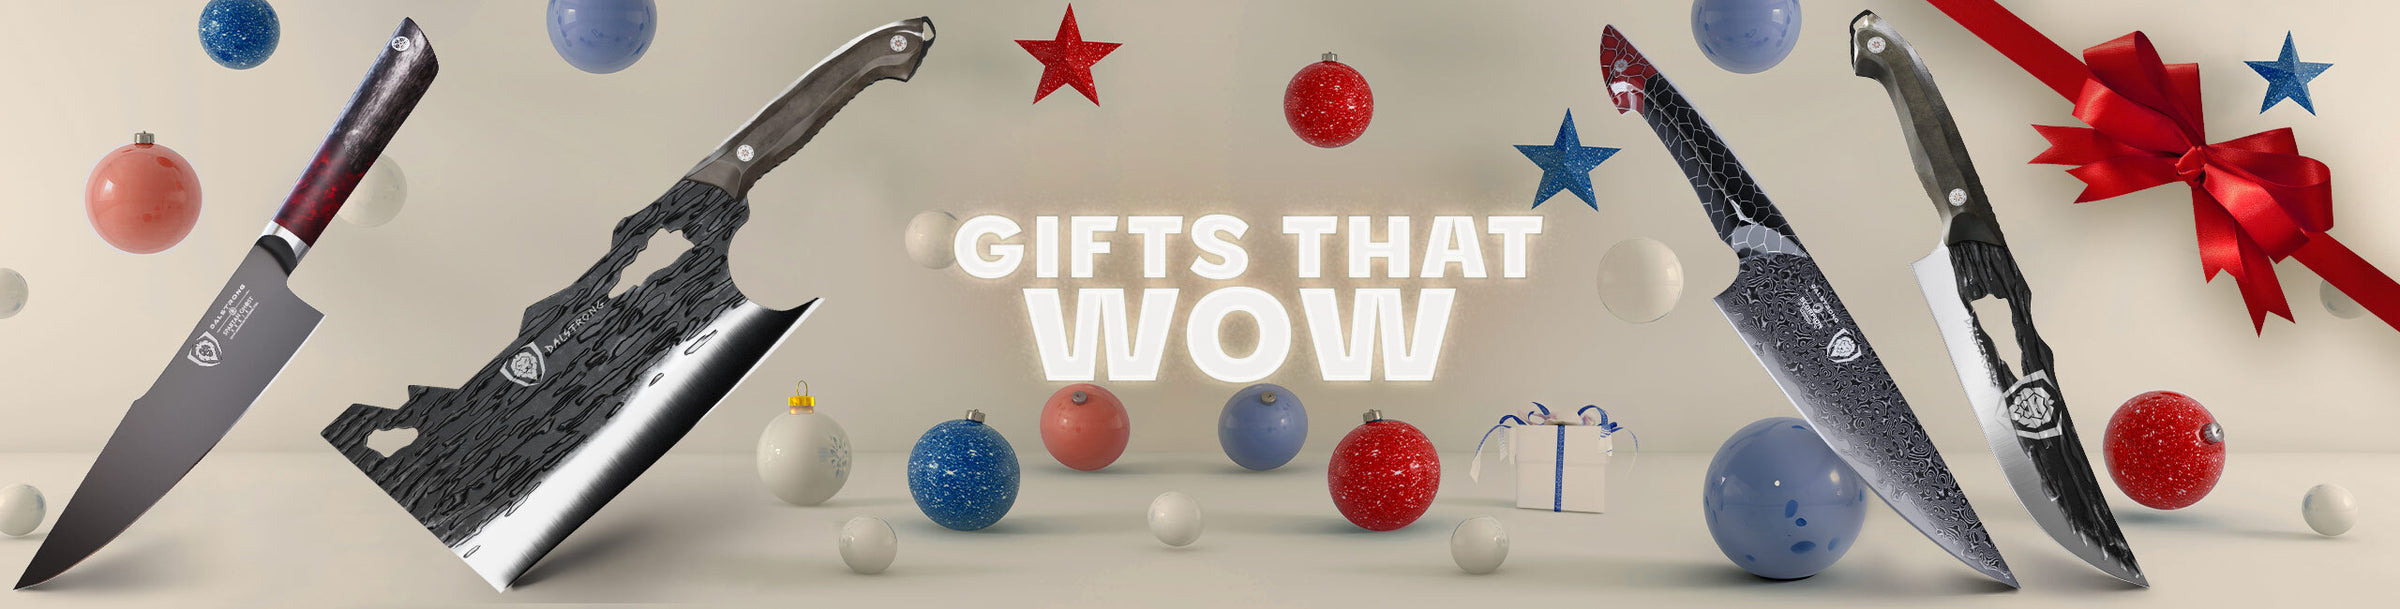 Gifts That Wow